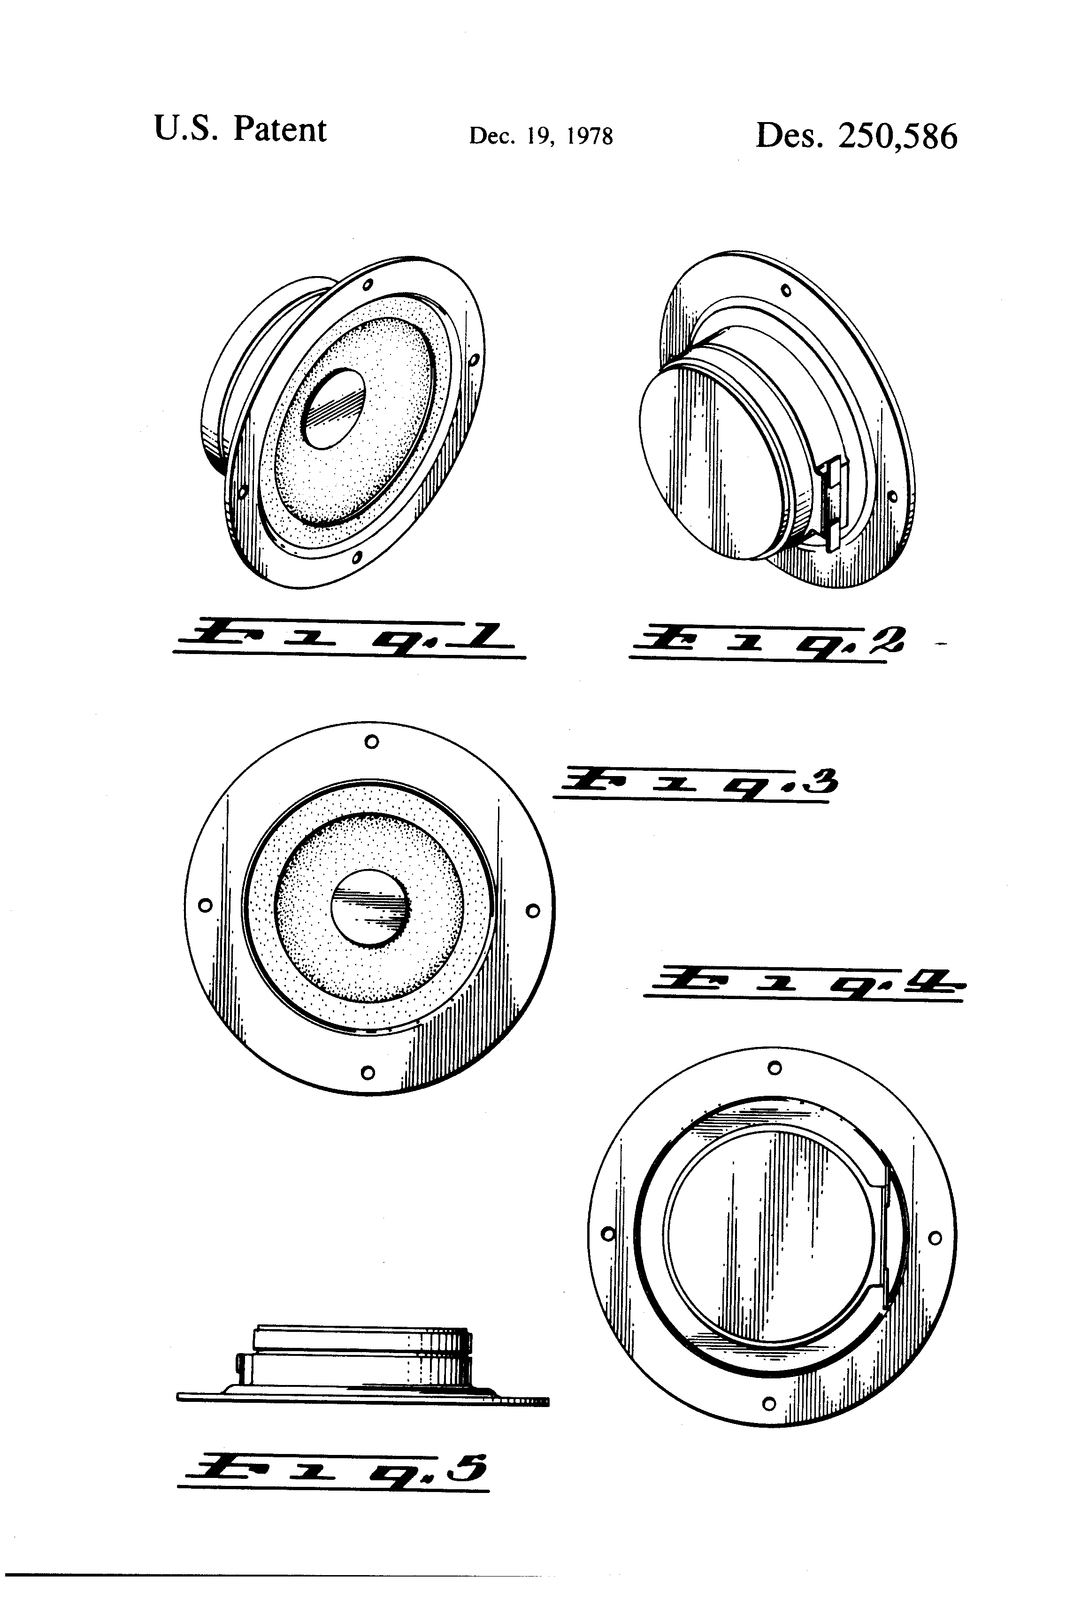 USD250586-1.png